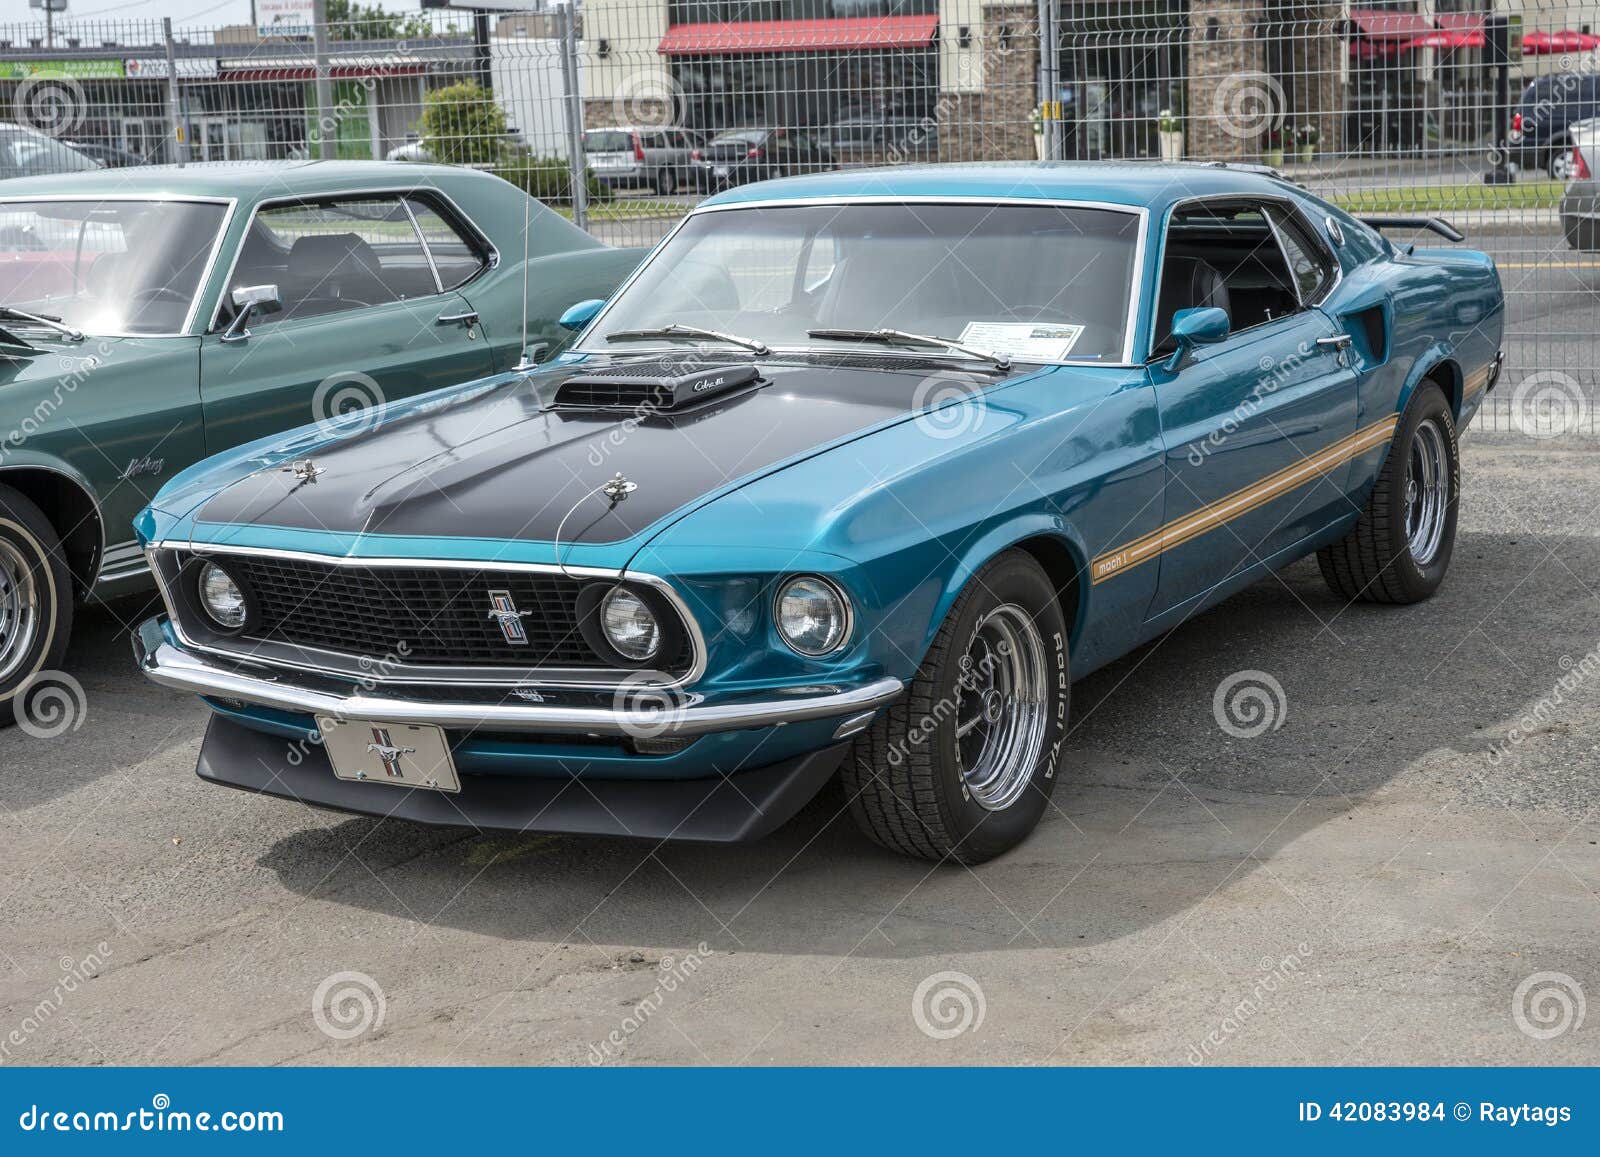 Ford mustang editorial stock image. Image of engine, exposition - 42083984